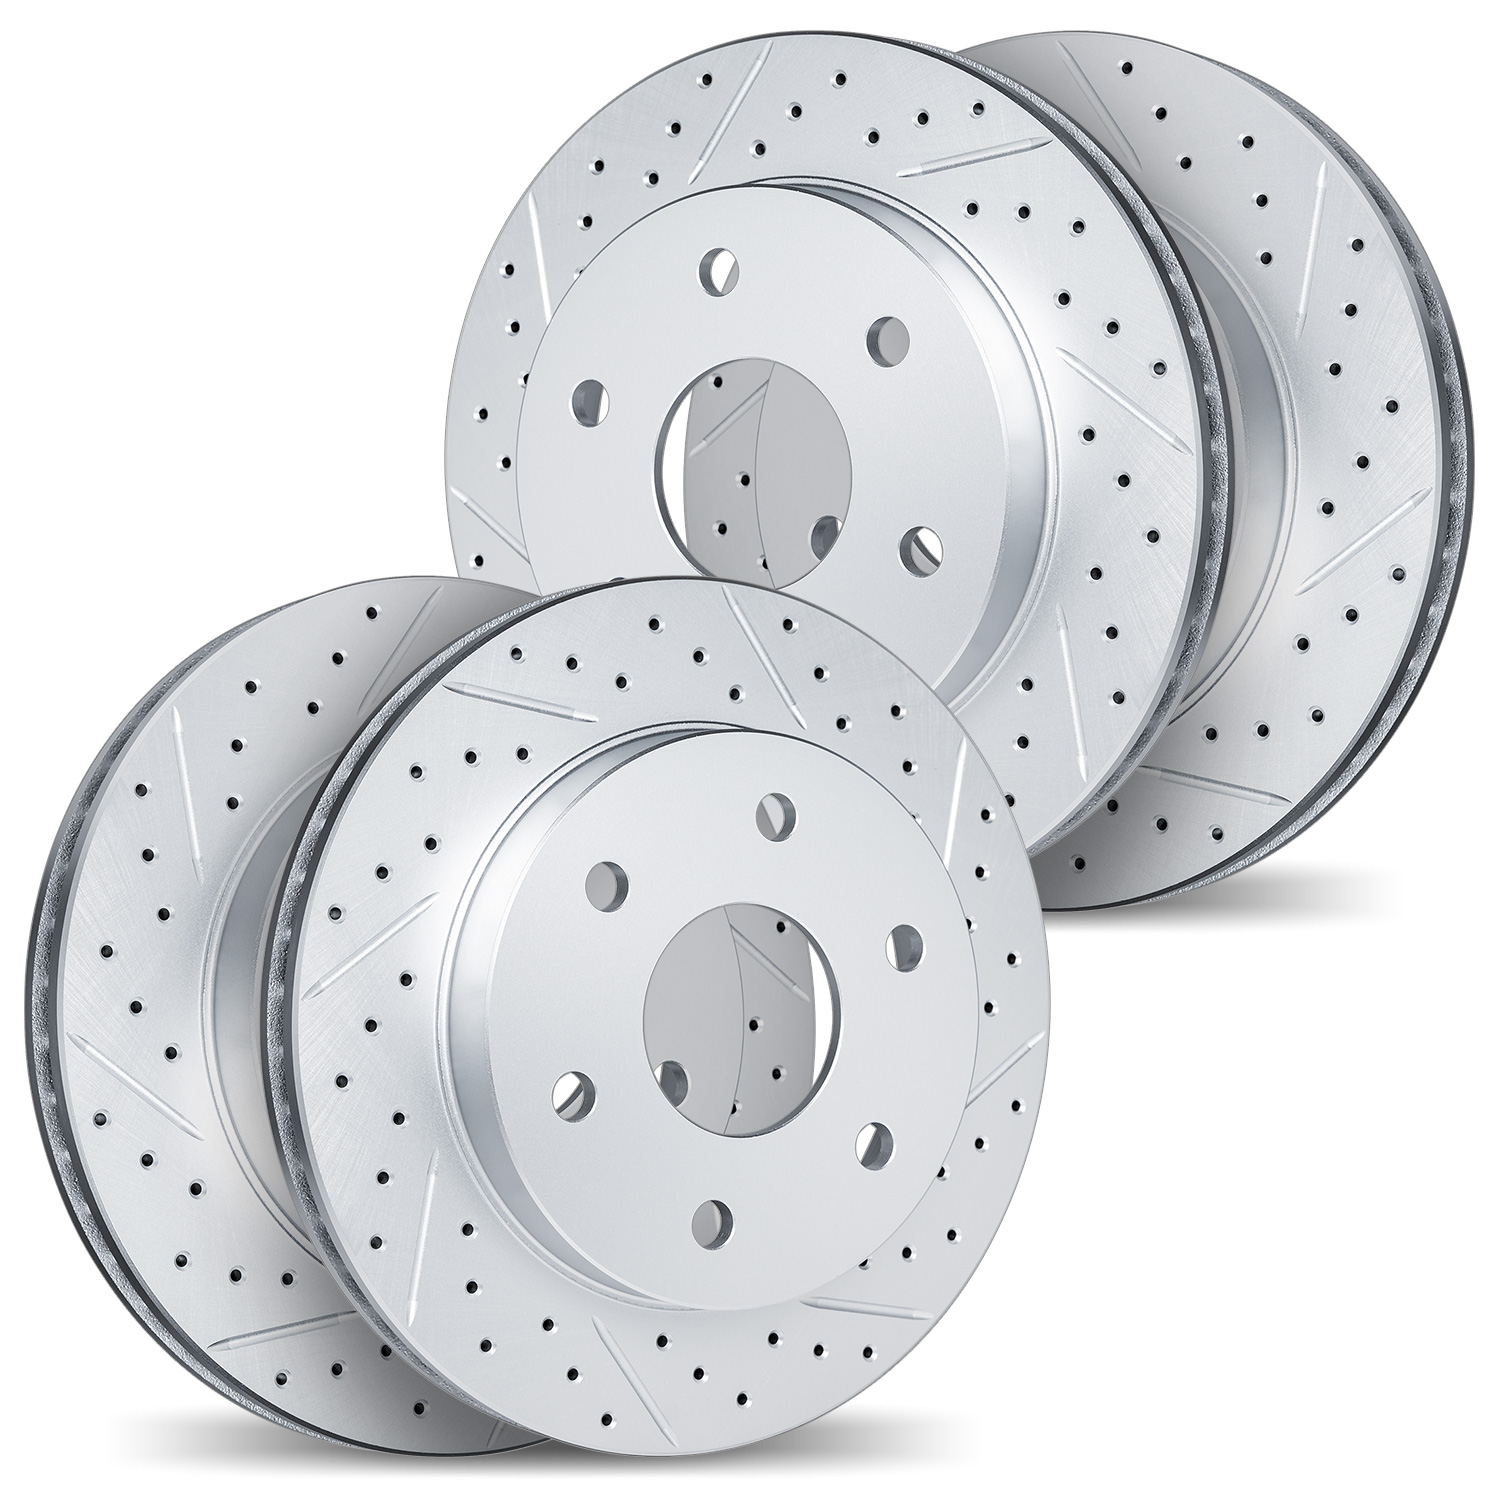 2004-54087 Geoperformance Drilled/Slotted Brake Rotors, 2009-2009 Ford/Lincoln/Mercury/Mazda, Position: Front and Rear